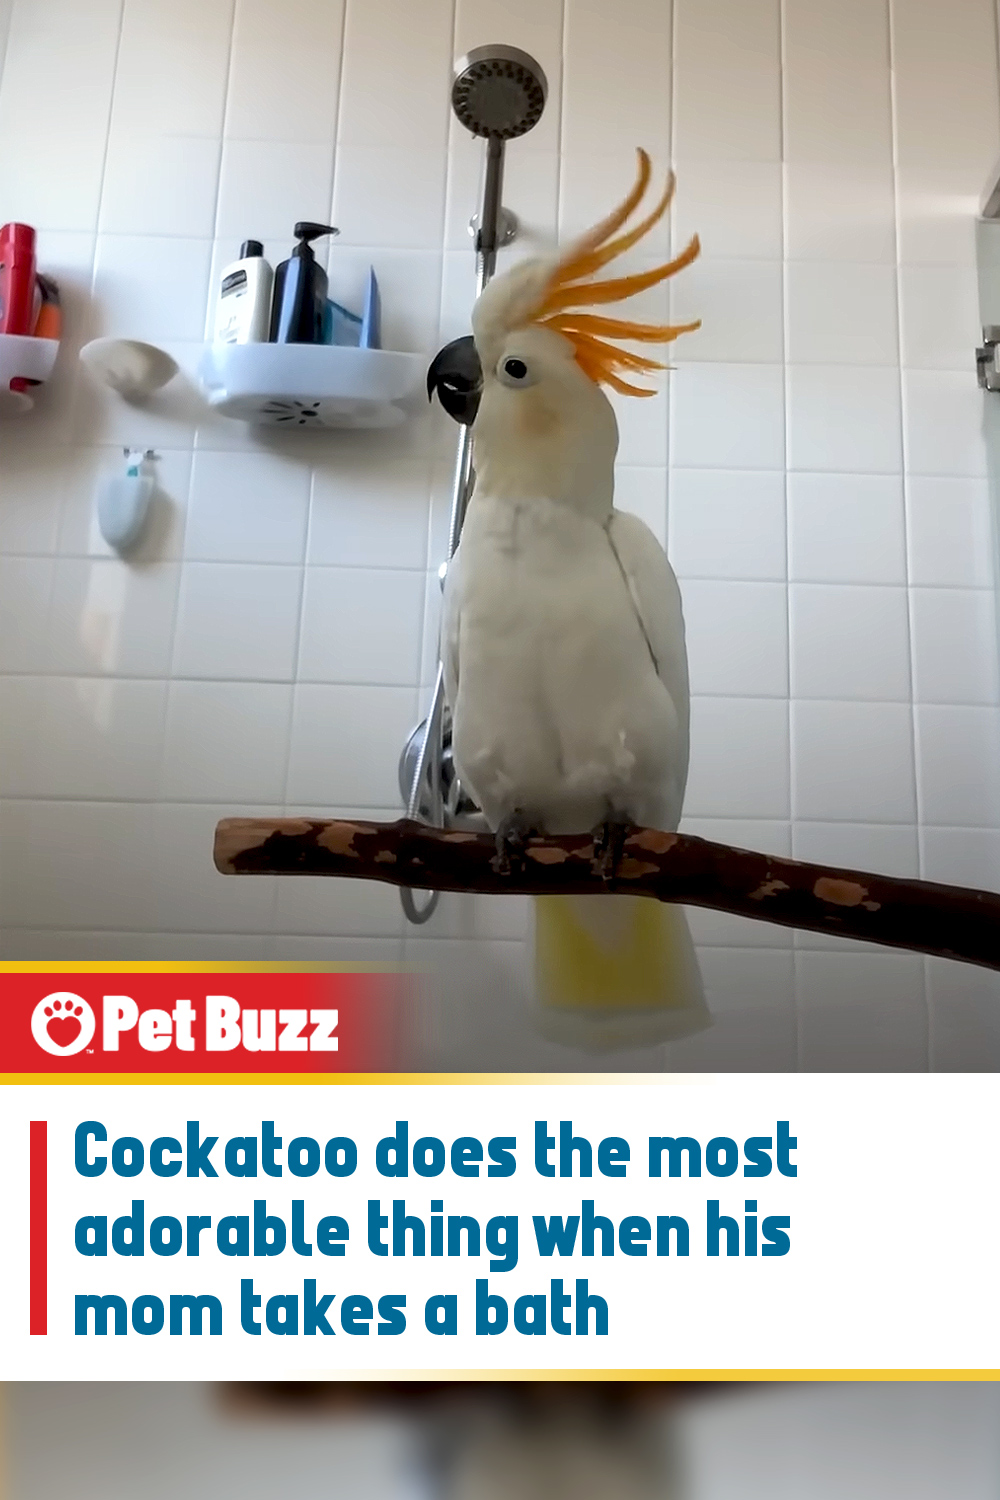 Cockatoo does the most adorable thing when his mom takes a bath